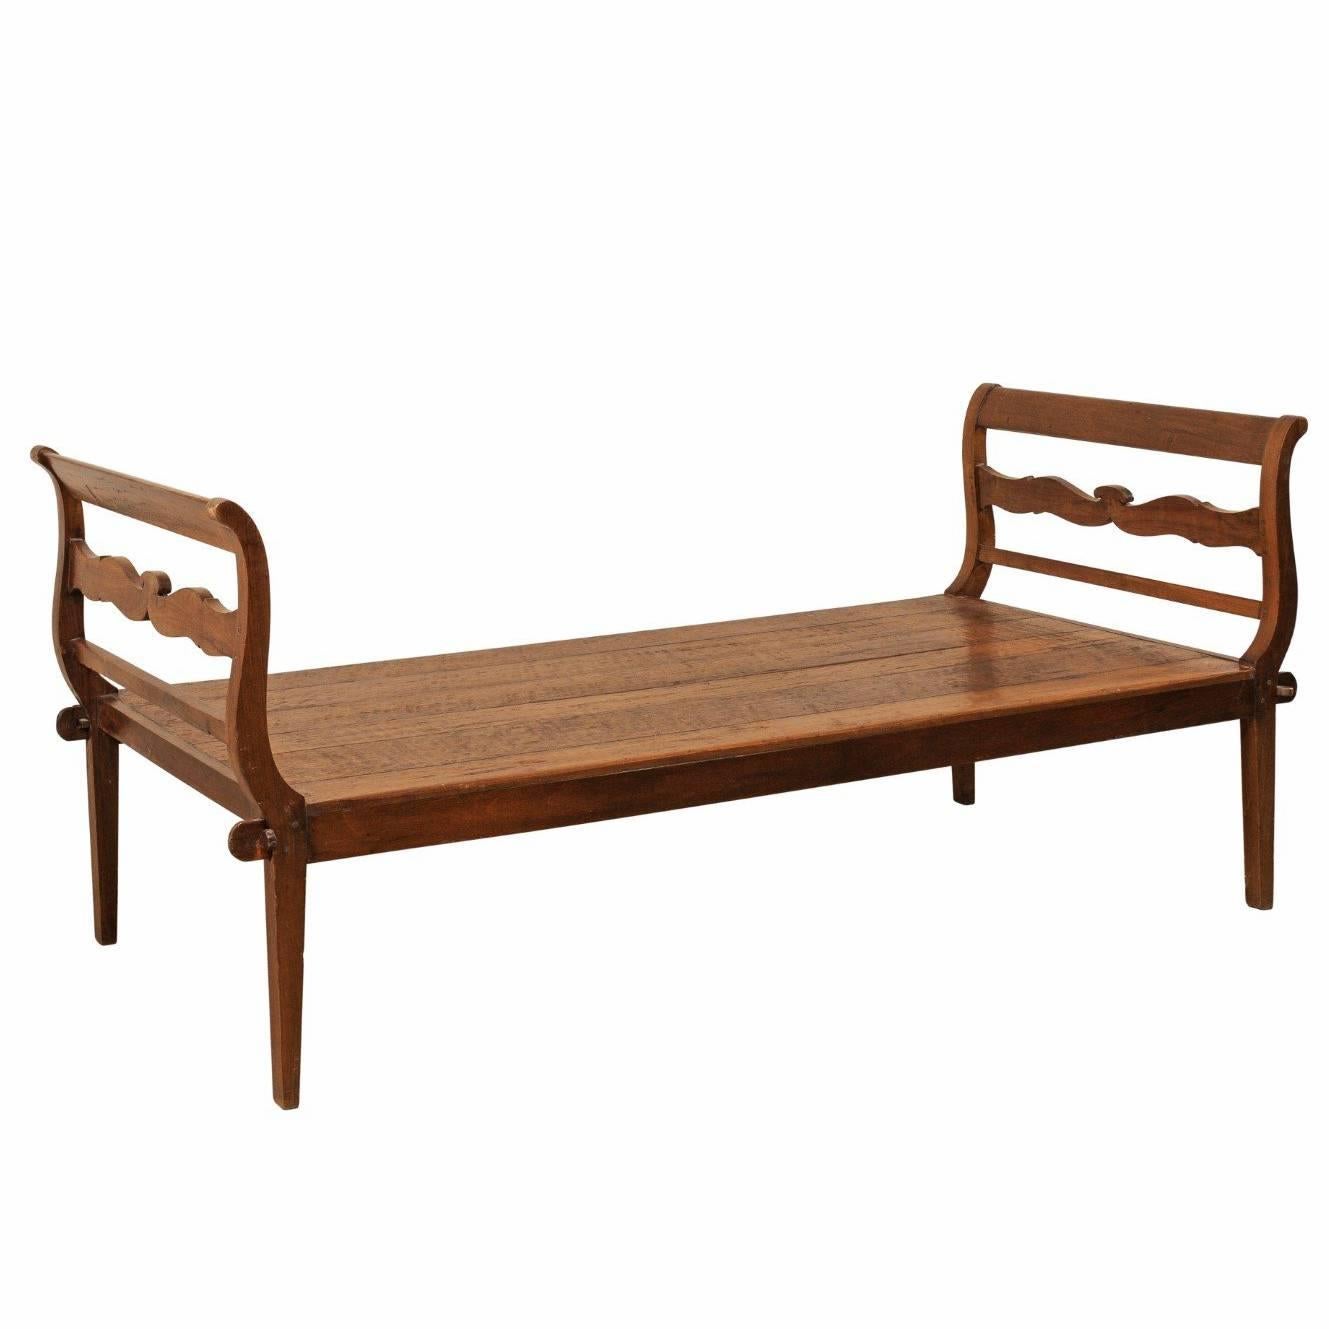 19th C. Brazilian Nicely Carved Peroba Hardwood Daybed (or Backless Bench) 